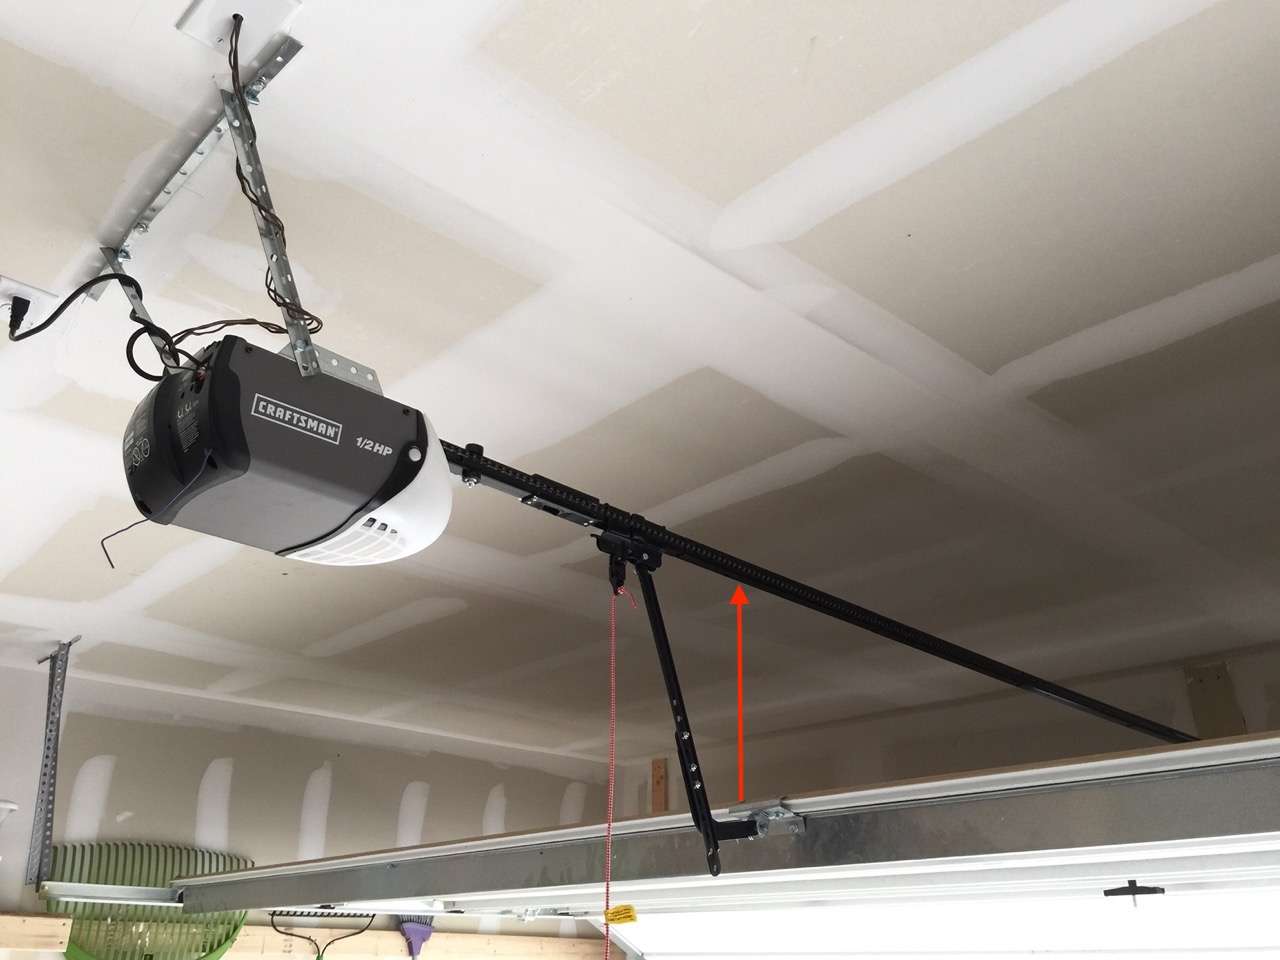 The garage door opener is mounted too high above the garage door which puts the pickup arm at the wrong angle. The rail should be no more than a couple of inches above the door.